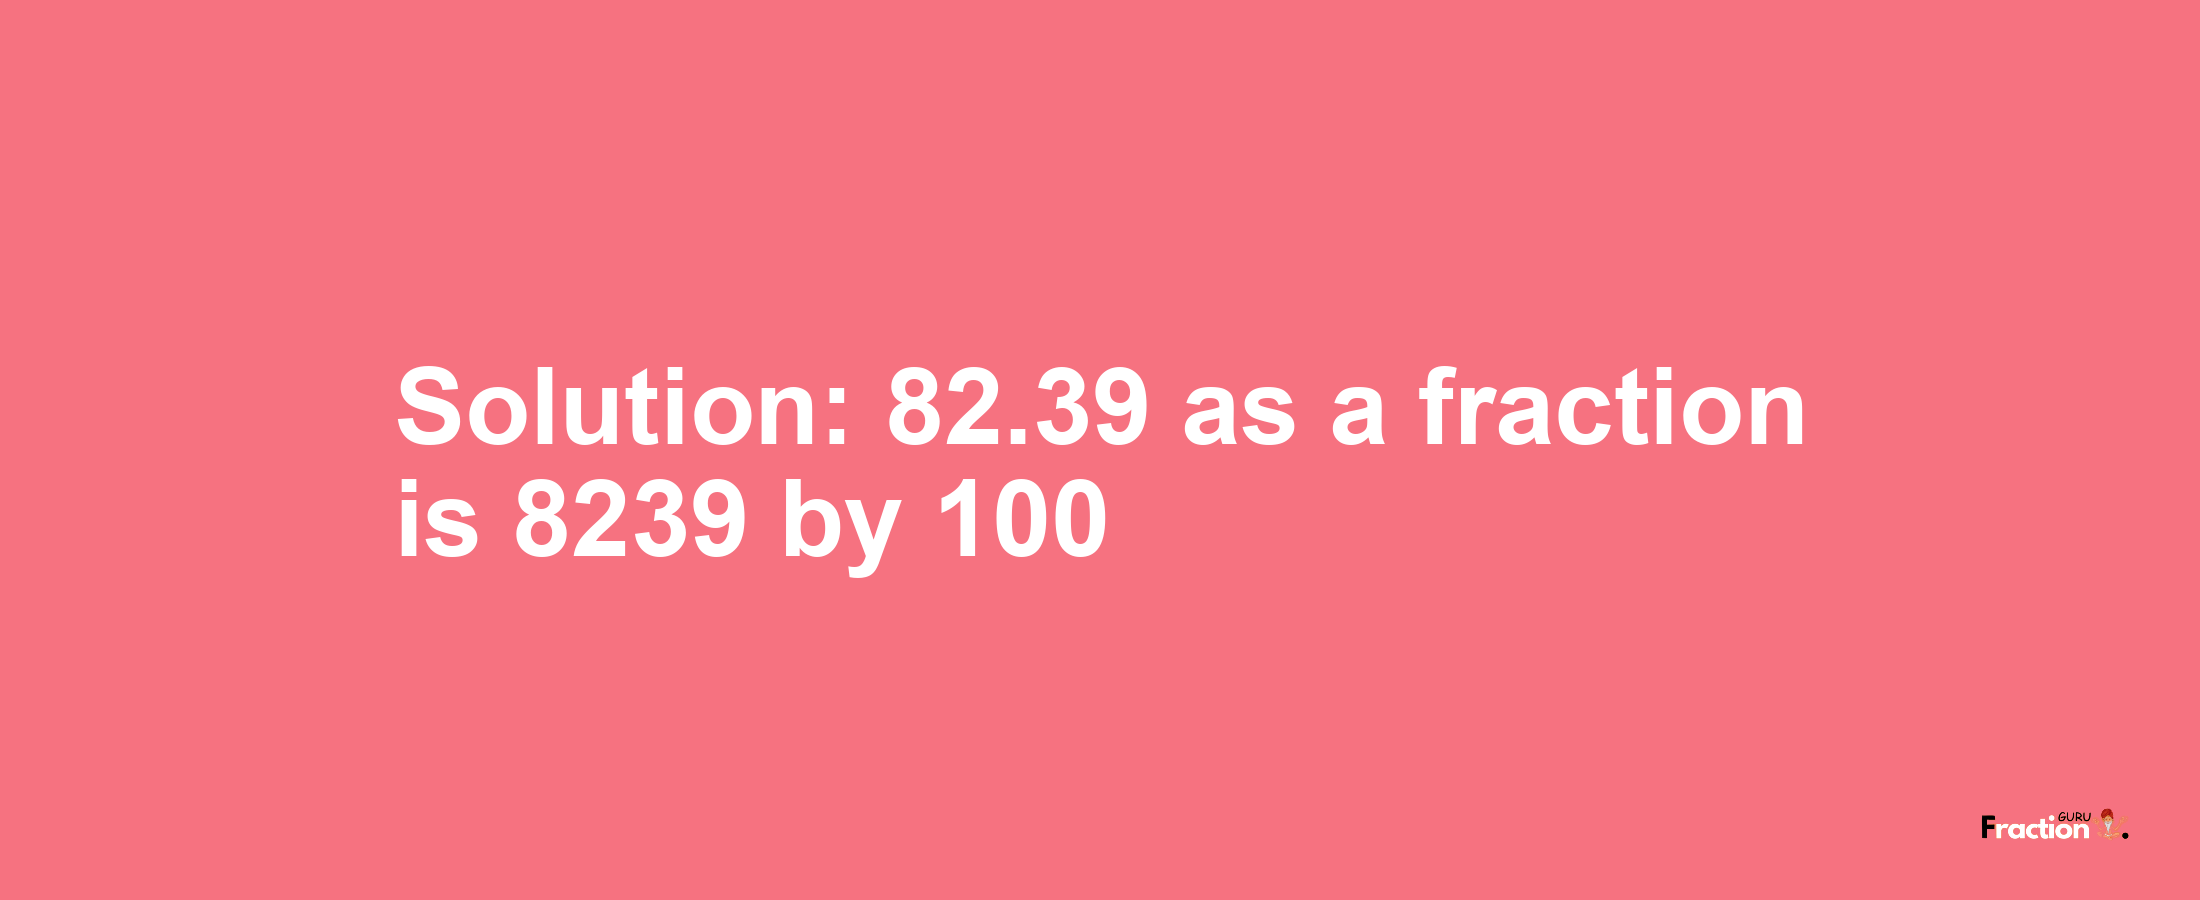 Solution:82.39 as a fraction is 8239/100